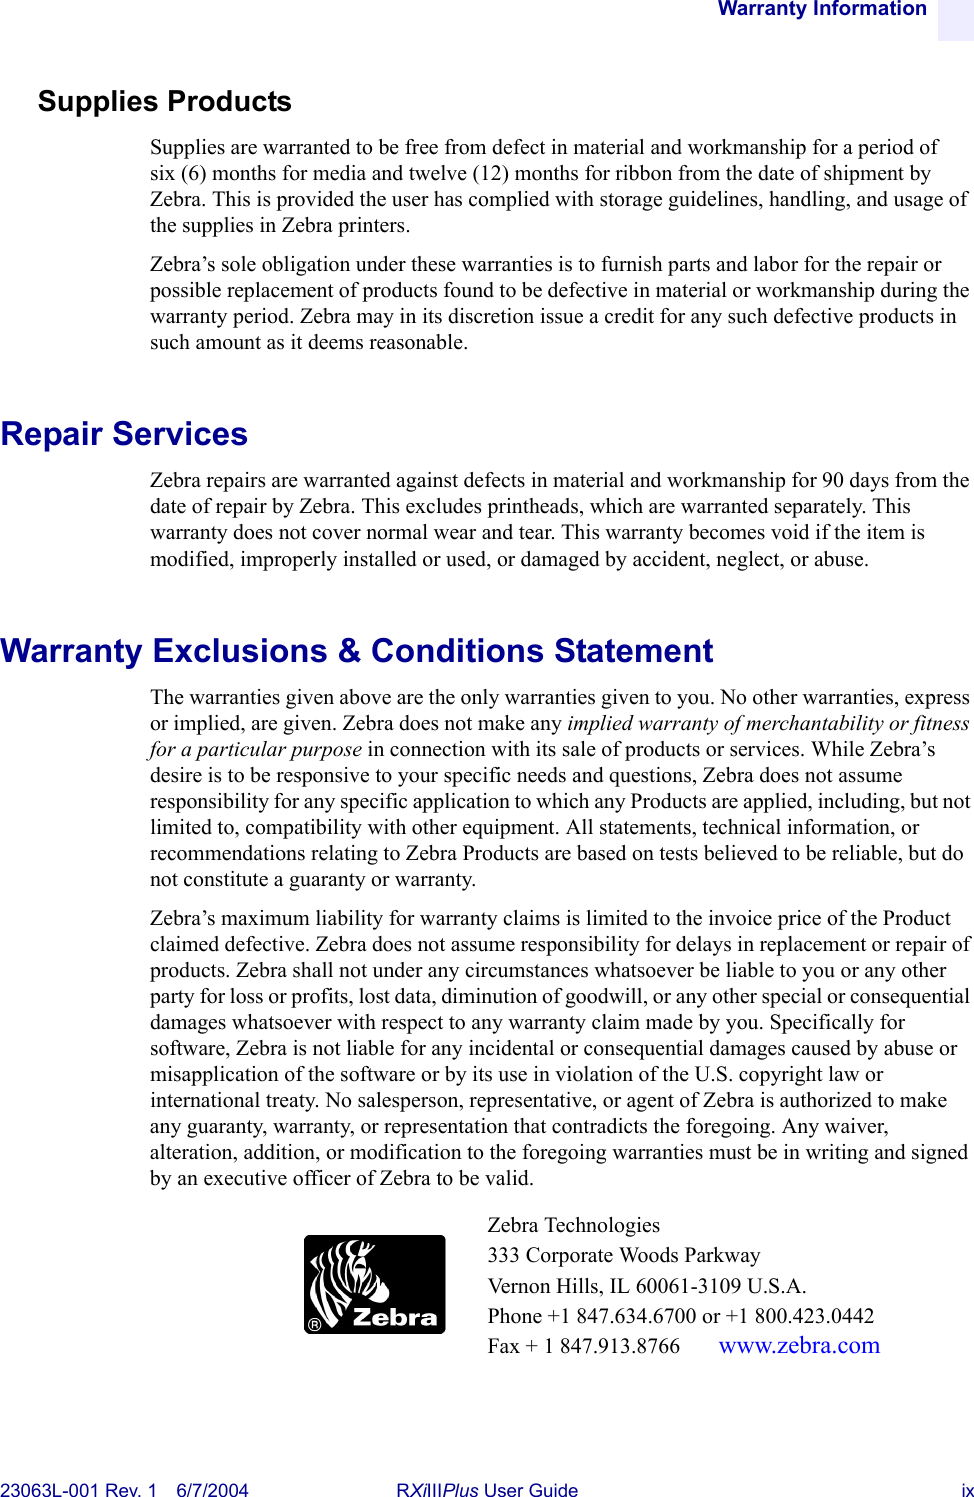 Warranty Information23063L-001 Rev. 1 6/7/2004 RXiIIIPlus User Guide ixSupplies ProductsSupplies are warranted to be free from defect in material and workmanship for a period of six (6) months for media and twelve (12) months for ribbon from the date of shipment by Zebra. This is provided the user has complied with storage guidelines, handling, and usage of the supplies in Zebra printers. Zebra’s sole obligation under these warranties is to furnish parts and labor for the repair or possible replacement of products found to be defective in material or workmanship during the warranty period. Zebra may in its discretion issue a credit for any such defective products in such amount as it deems reasonable.Repair ServicesZebra repairs are warranted against defects in material and workmanship for 90 days from the date of repair by Zebra. This excludes printheads, which are warranted separately. This warranty does not cover normal wear and tear. This warranty becomes void if the item is modified, improperly installed or used, or damaged by accident, neglect, or abuse.Warranty Exclusions &amp; Conditions StatementThe warranties given above are the only warranties given to you. No other warranties, express or implied, are given. Zebra does not make any implied warranty of merchantability or fitness for a particular purpose in connection with its sale of products or services. While Zebra’s desire is to be responsive to your specific needs and questions, Zebra does not assume responsibility for any specific application to which any Products are applied, including, but not limited to, compatibility with other equipment. All statements, technical information, or recommendations relating to Zebra Products are based on tests believed to be reliable, but do not constitute a guaranty or warranty.Zebra’s maximum liability for warranty claims is limited to the invoice price of the Product claimed defective. Zebra does not assume responsibility for delays in replacement or repair of products. Zebra shall not under any circumstances whatsoever be liable to you or any other party for loss or profits, lost data, diminution of goodwill, or any other special or consequential damages whatsoever with respect to any warranty claim made by you. Specifically for software, Zebra is not liable for any incidental or consequential damages caused by abuse or misapplication of the software or by its use in violation of the U.S. copyright law or international treaty. No salesperson, representative, or agent of Zebra is authorized to make any guaranty, warranty, or representation that contradicts the foregoing. Any waiver, alteration, addition, or modification to the foregoing warranties must be in writing and signed by an executive officer of Zebra to be valid.Zebra Technologies333 Corporate Woods ParkwayVernon Hills, IL 60061-3109 U.S.A.Phone +1 847.634.6700 or +1 800.423.0442Fax + 1 847.913.8766  www.zebra.com